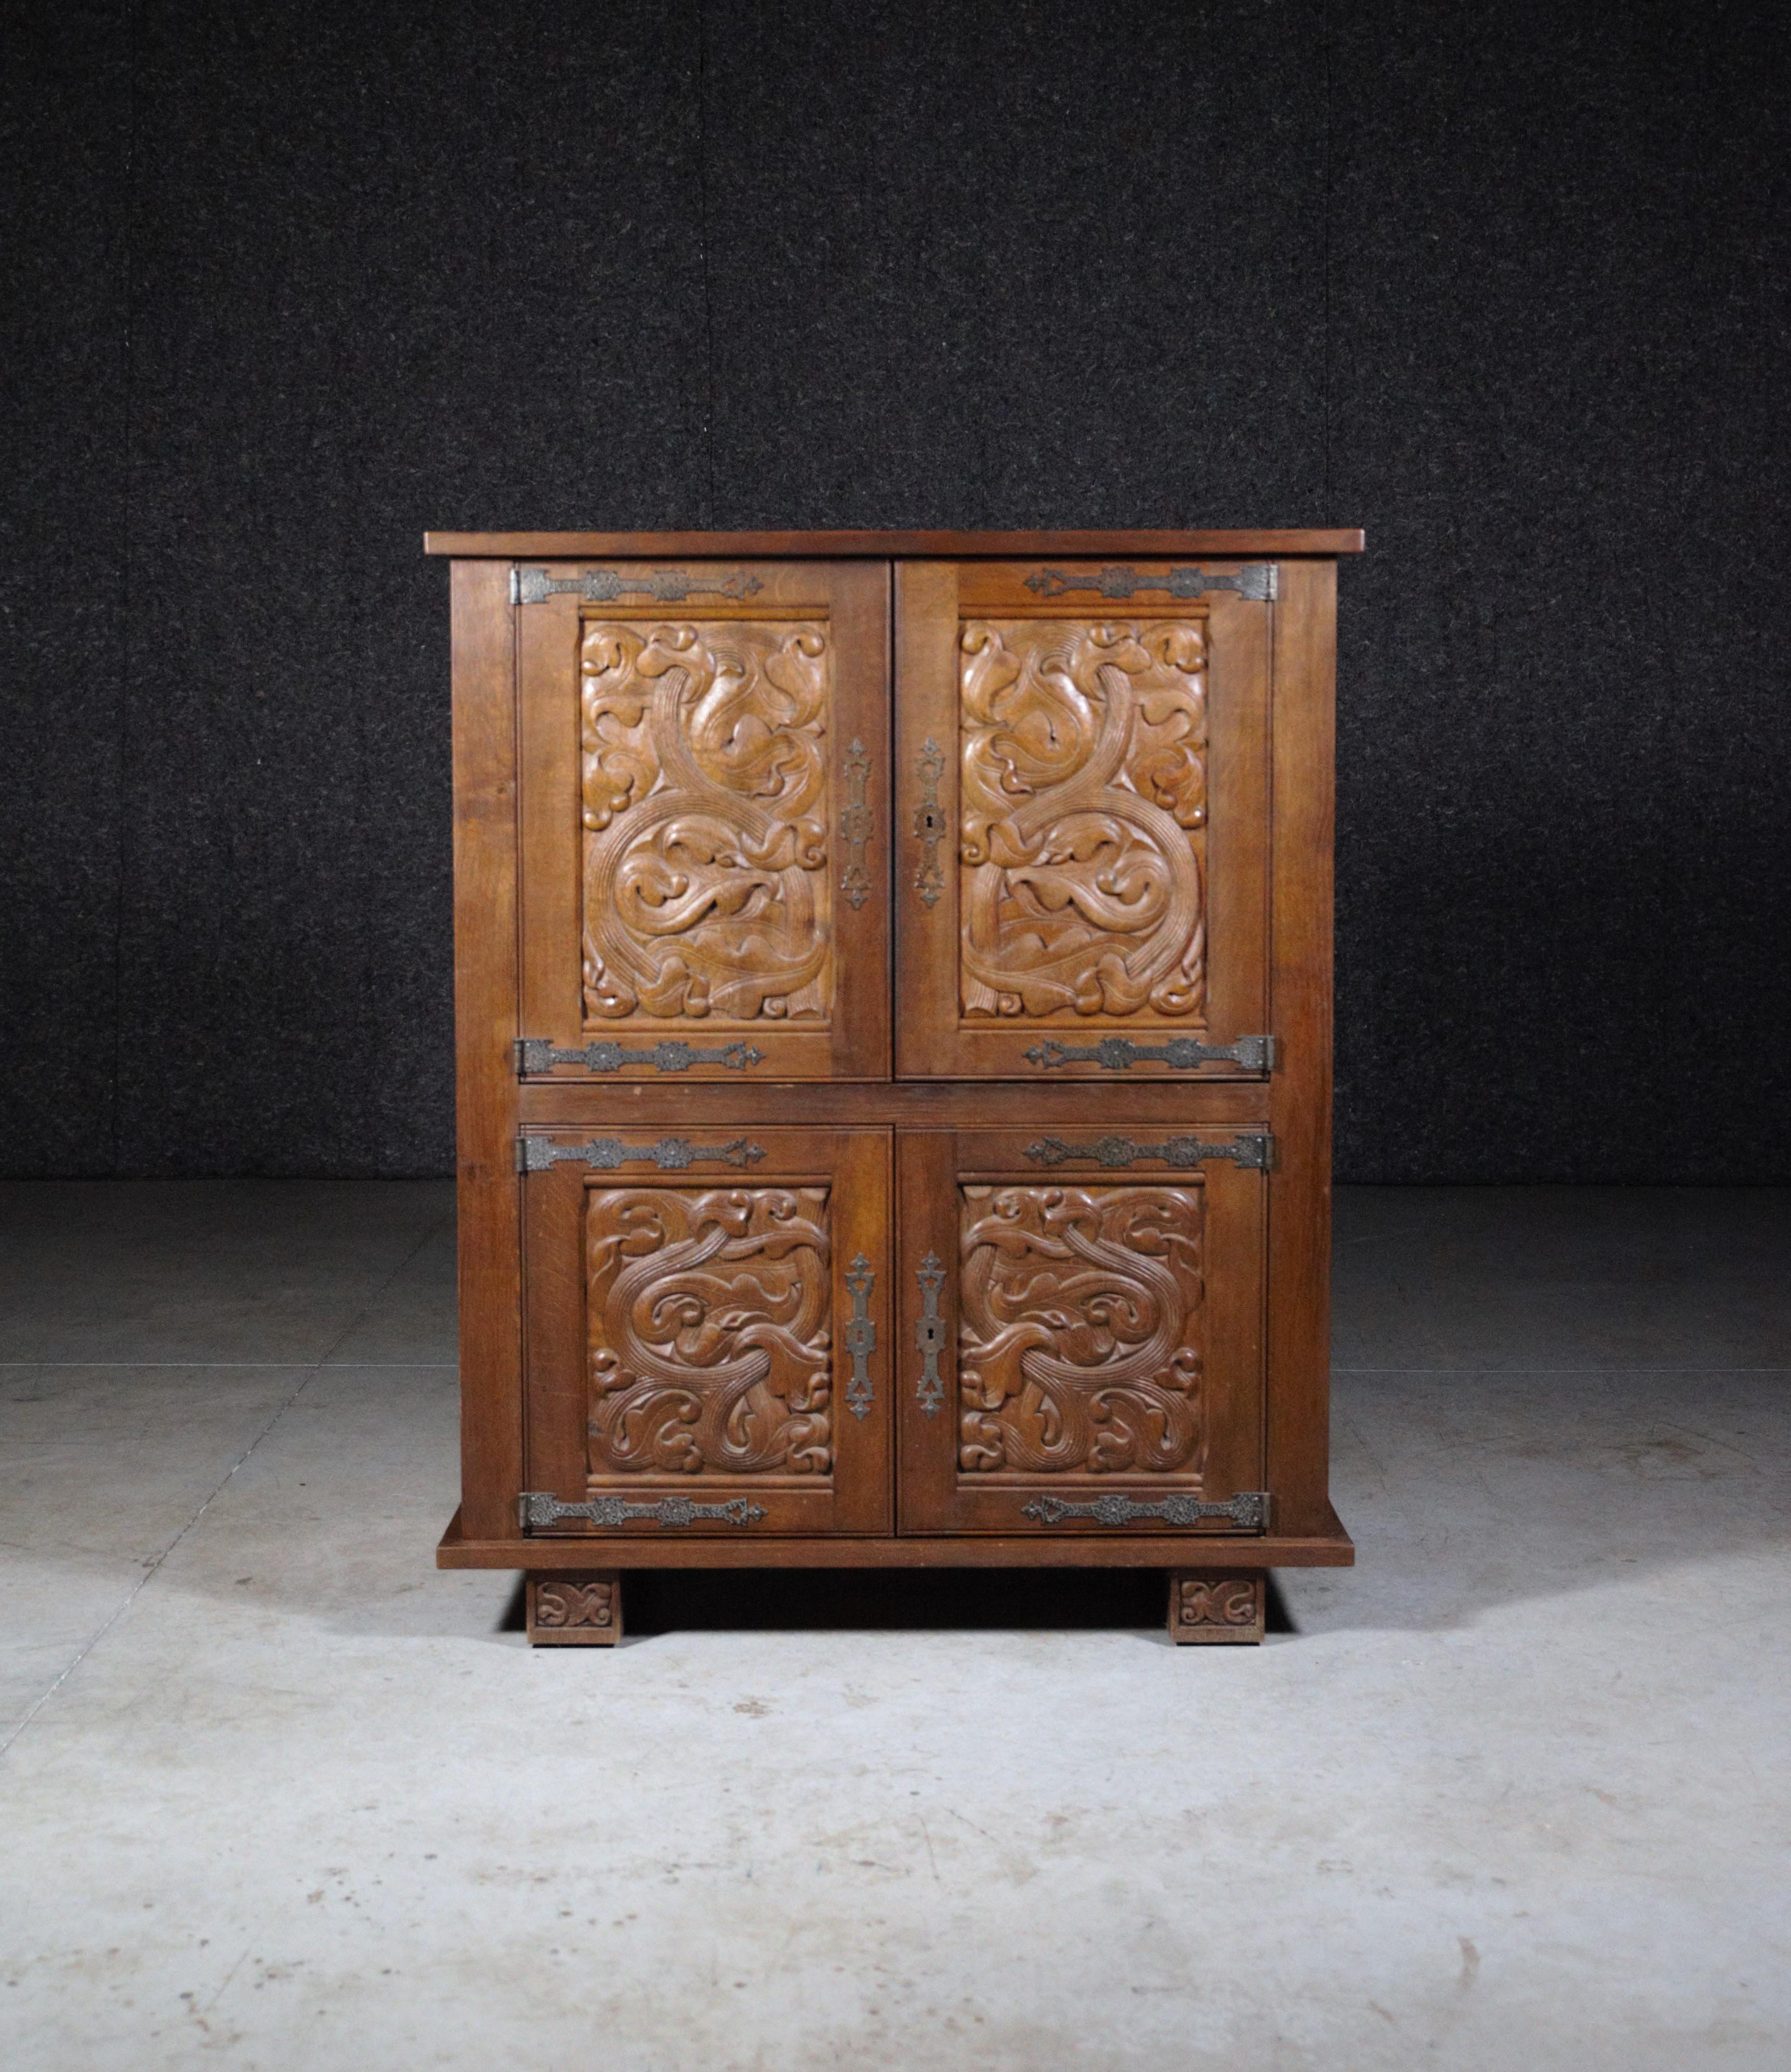 A small cabinet by Joseph Savina.

Sculpted oak and forged iron.

Model : Saint Gonéry

1970s